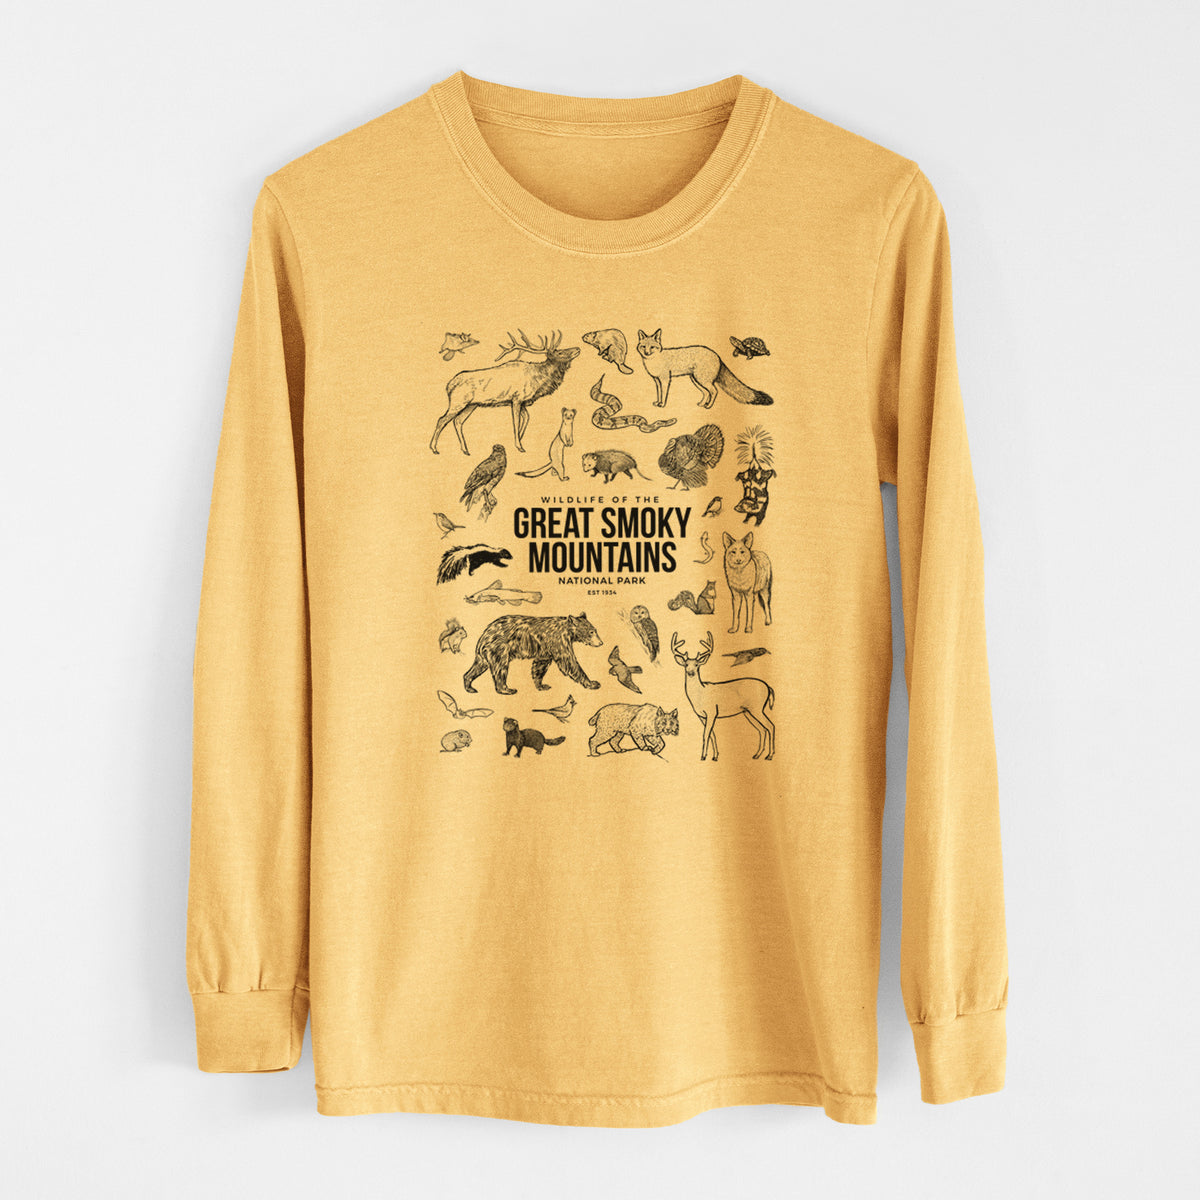 Wildlife of the Great Smoky Mountains National Park - Heavyweight 100% Cotton Long Sleeve